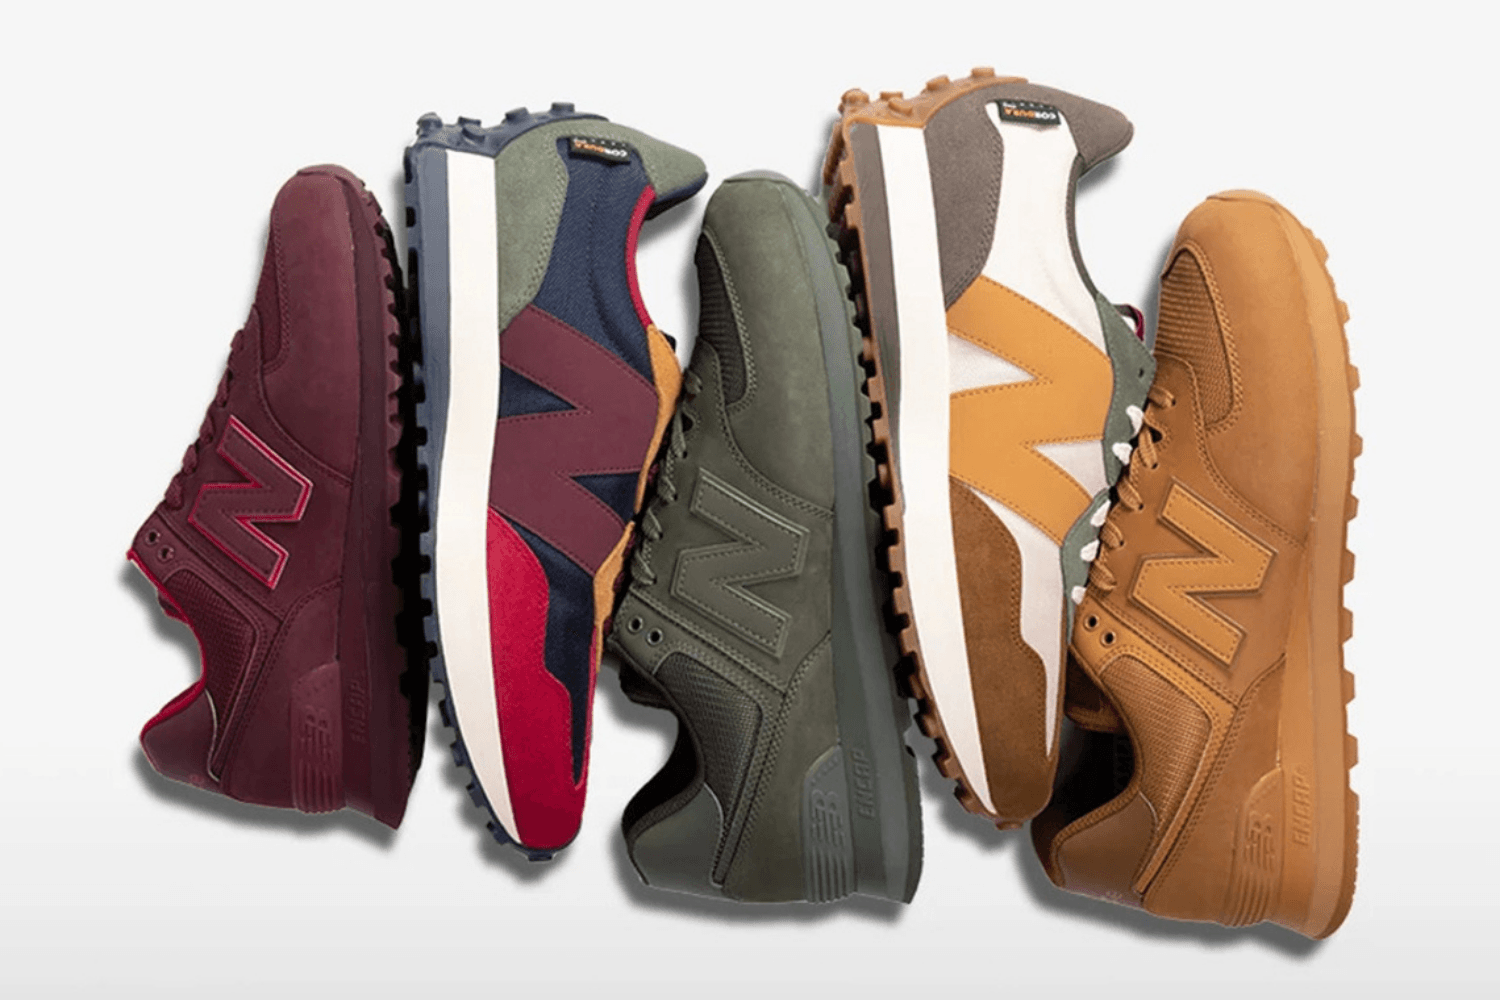 New Balance drops a 574 & 327 'Winterized' pack